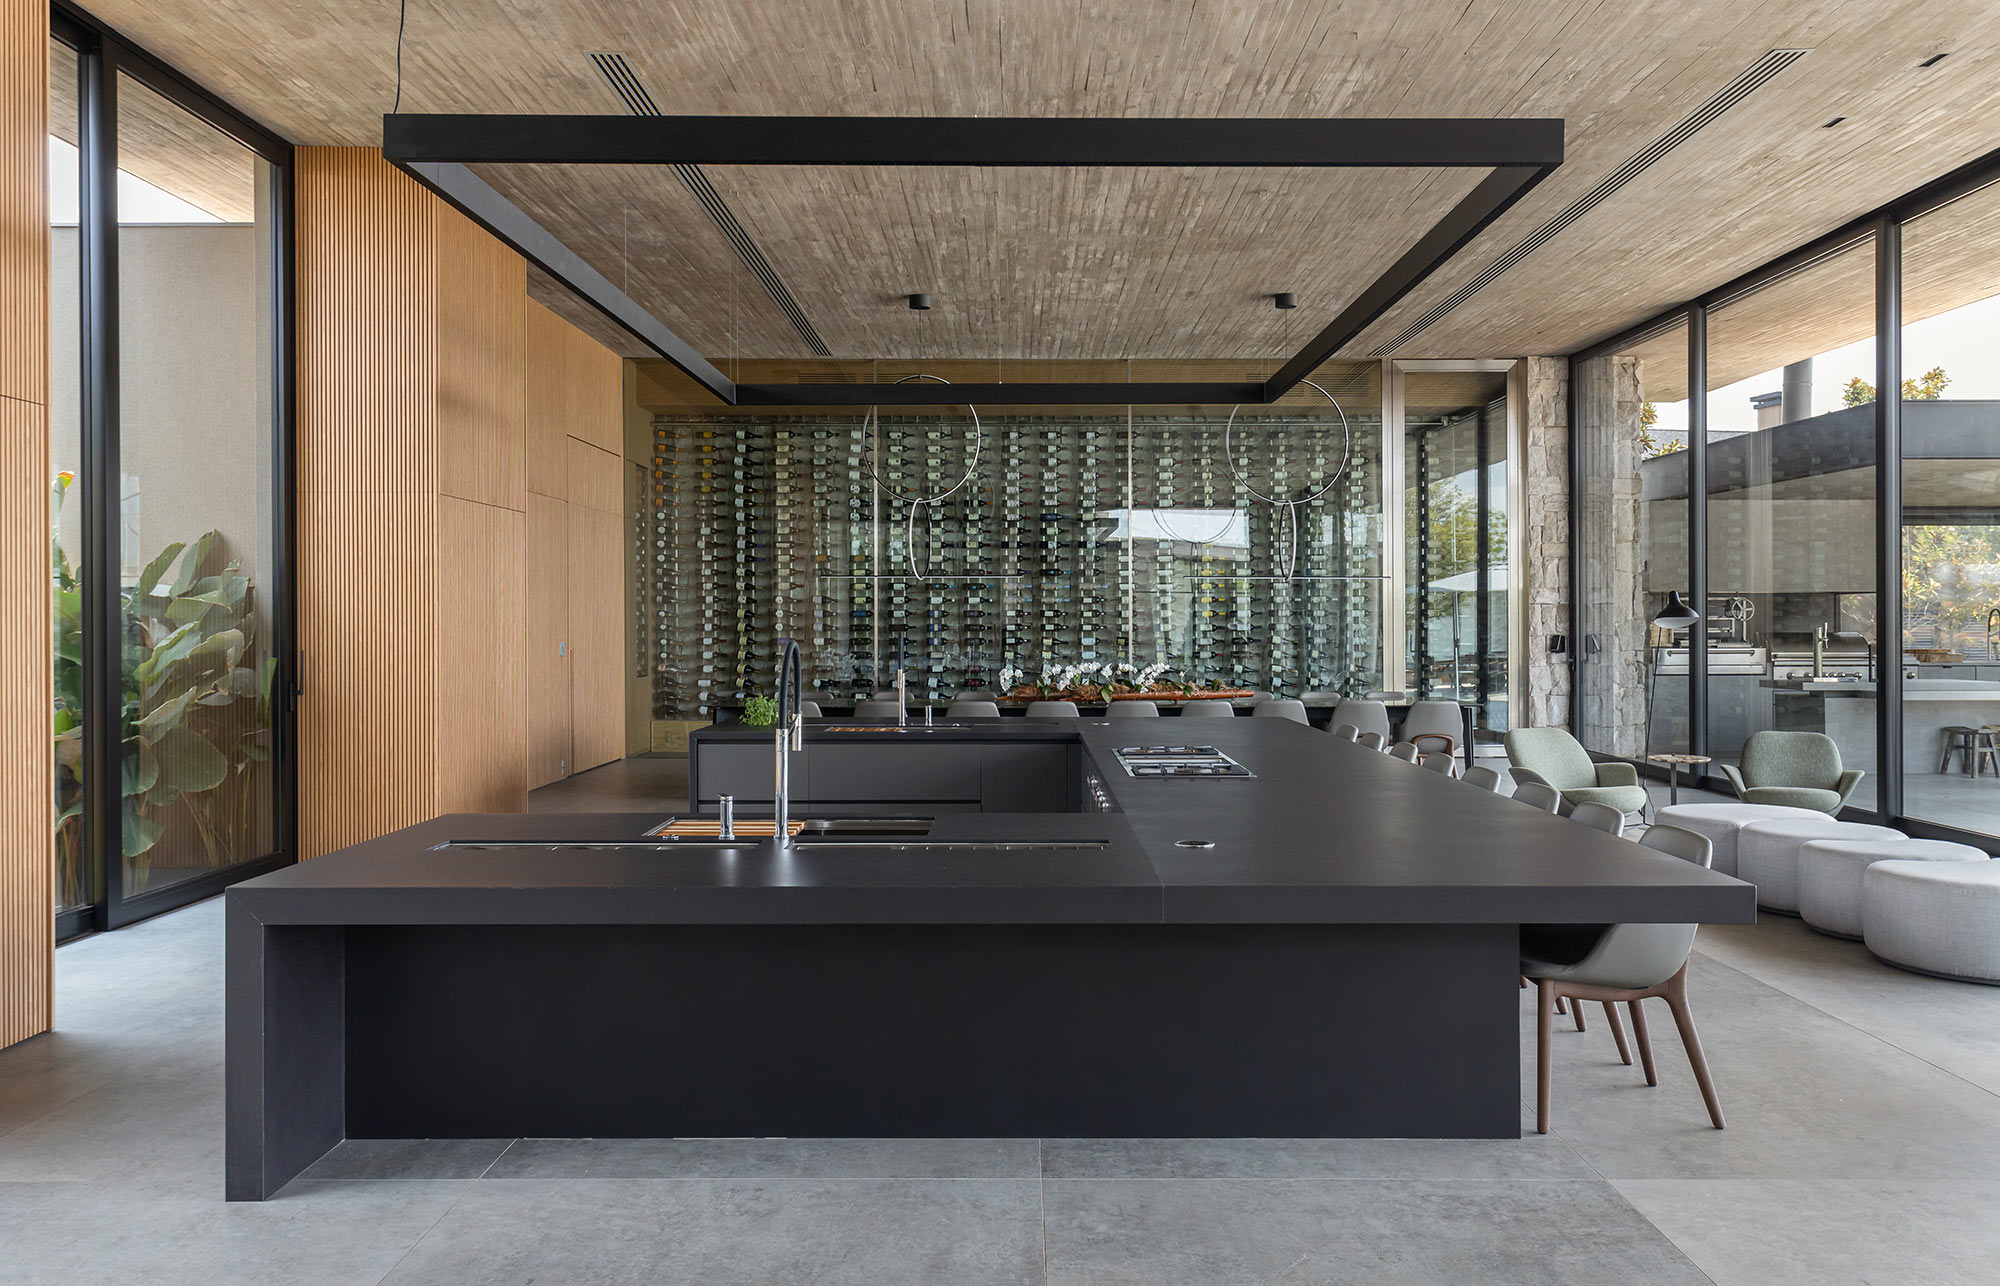 Image of Casa Hectares Dourados 14 in The warmth of the wood and Cosentino materials is the hallmark of this beautiful Australian kitchen - Cosentino